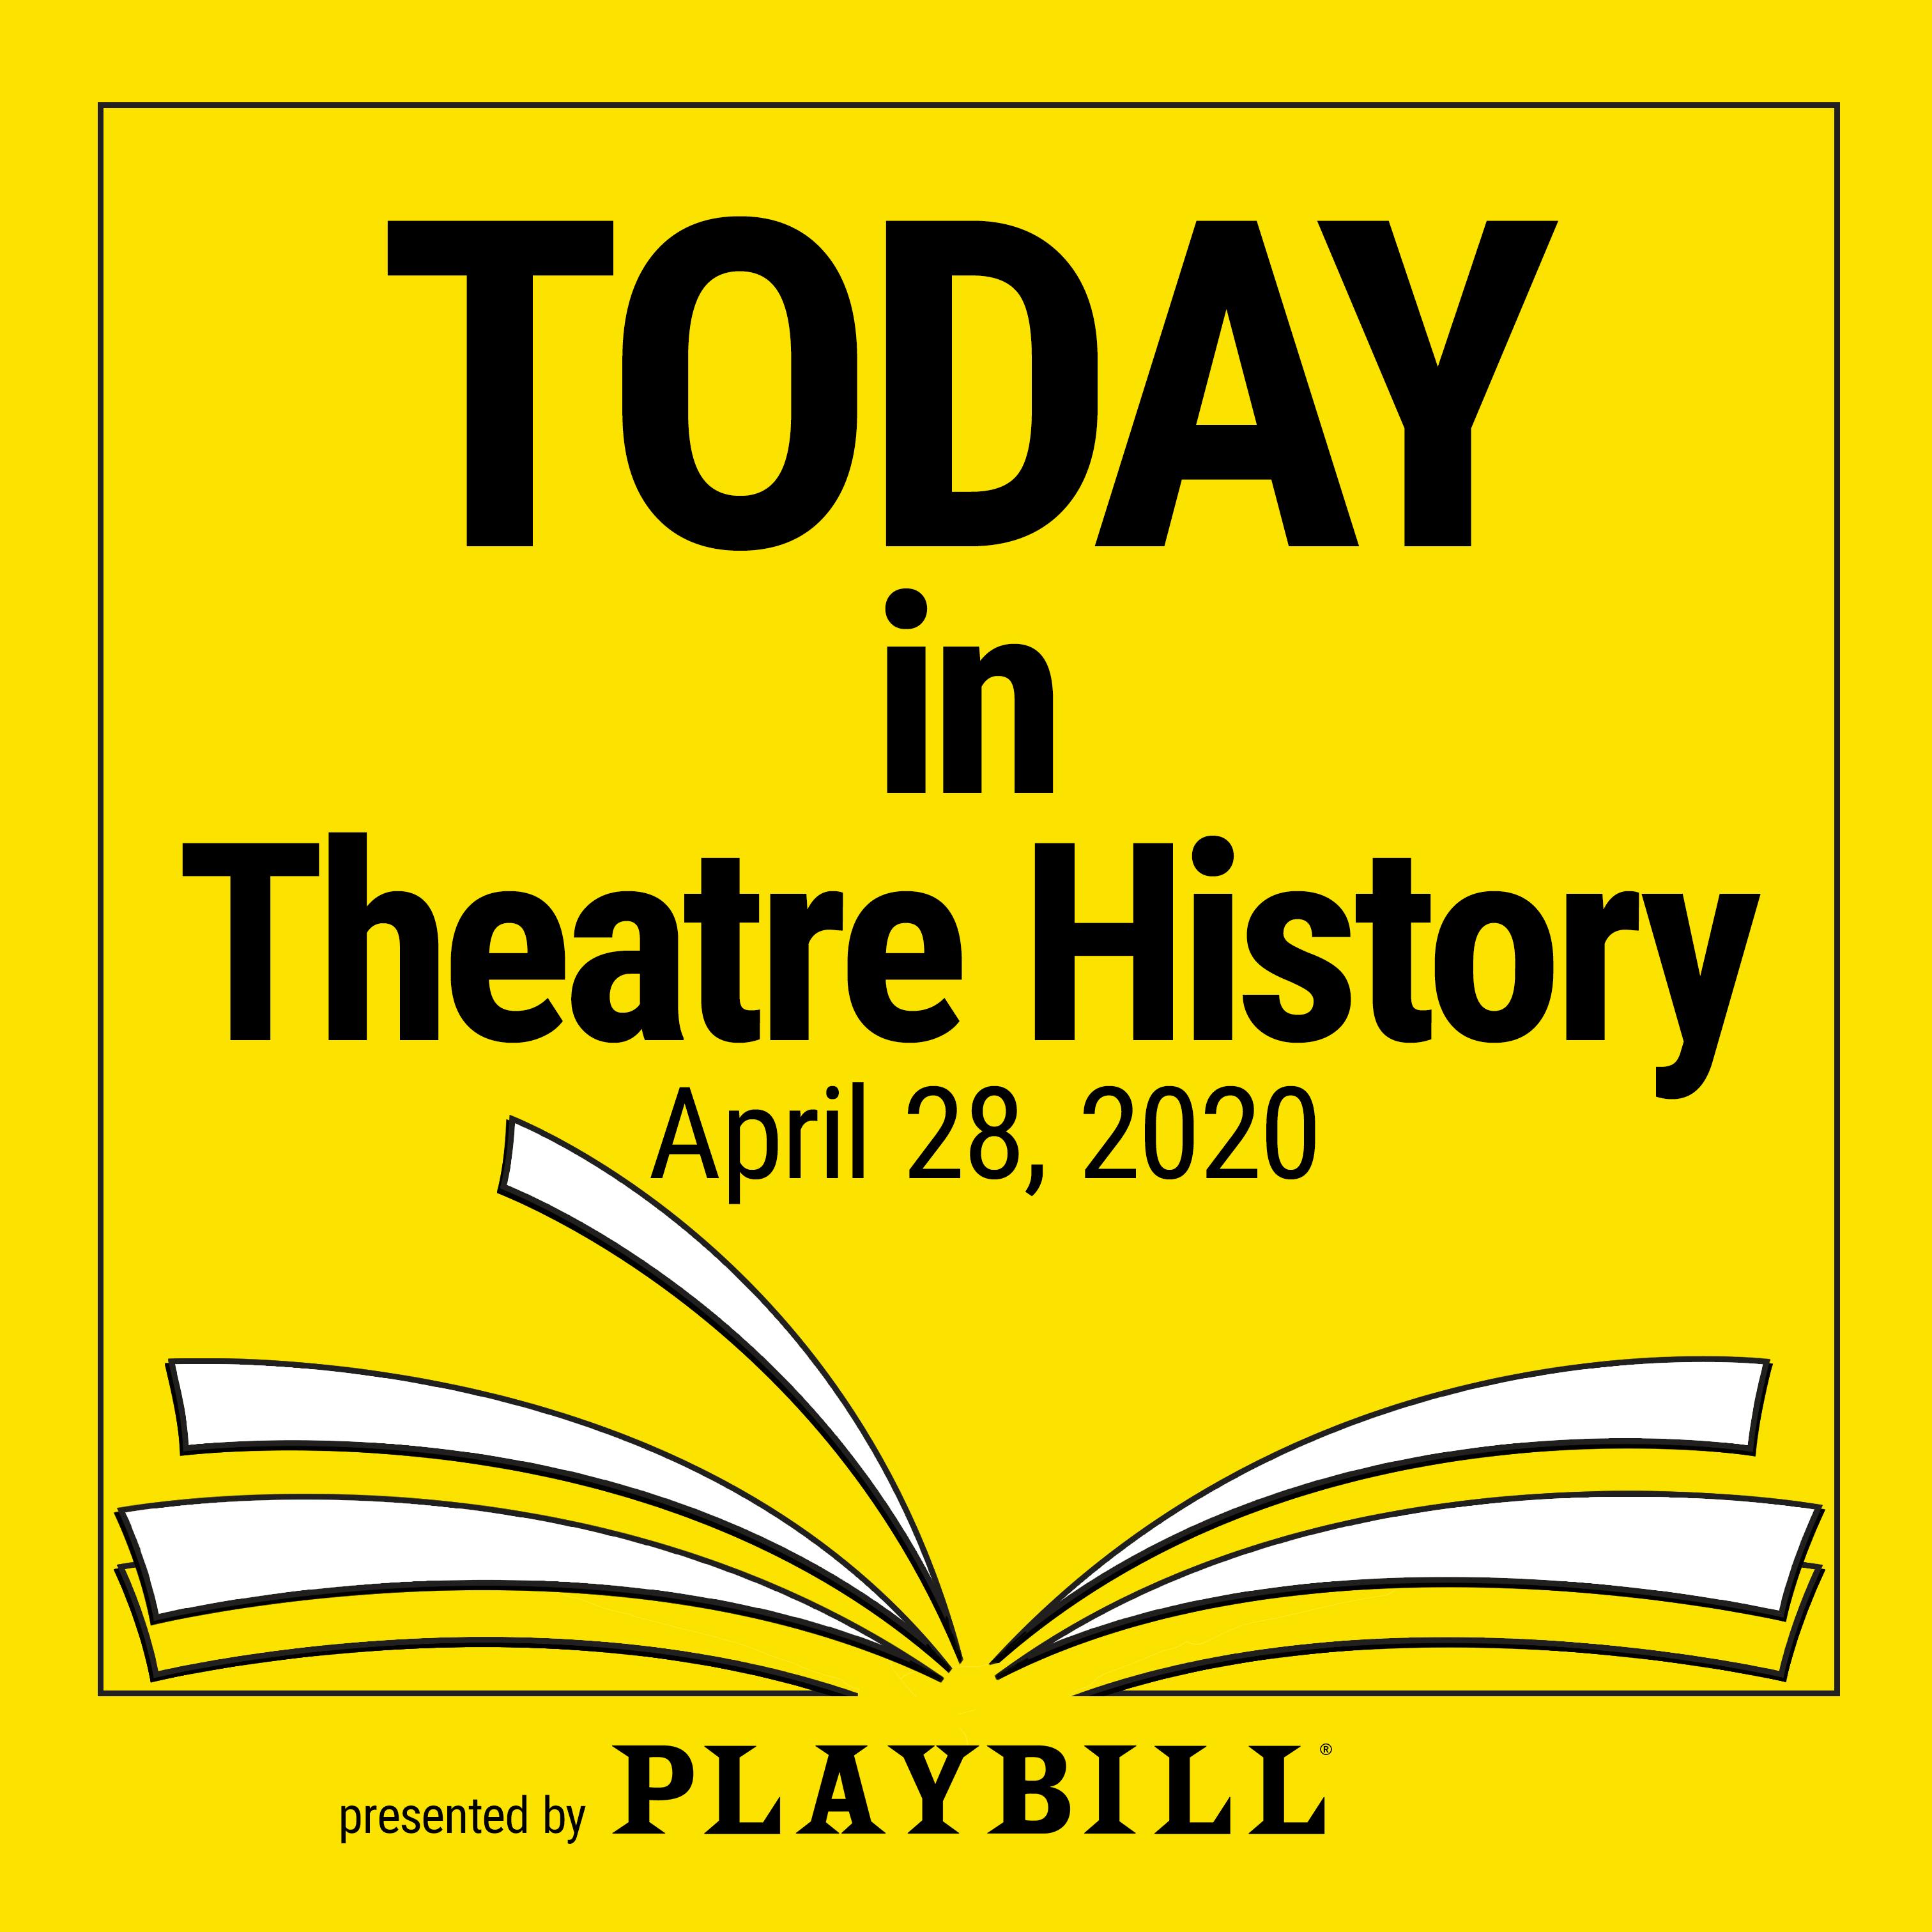 April 28, 2020: Emily Dickinson, chess, and a mad doctor all came to Broadway today.